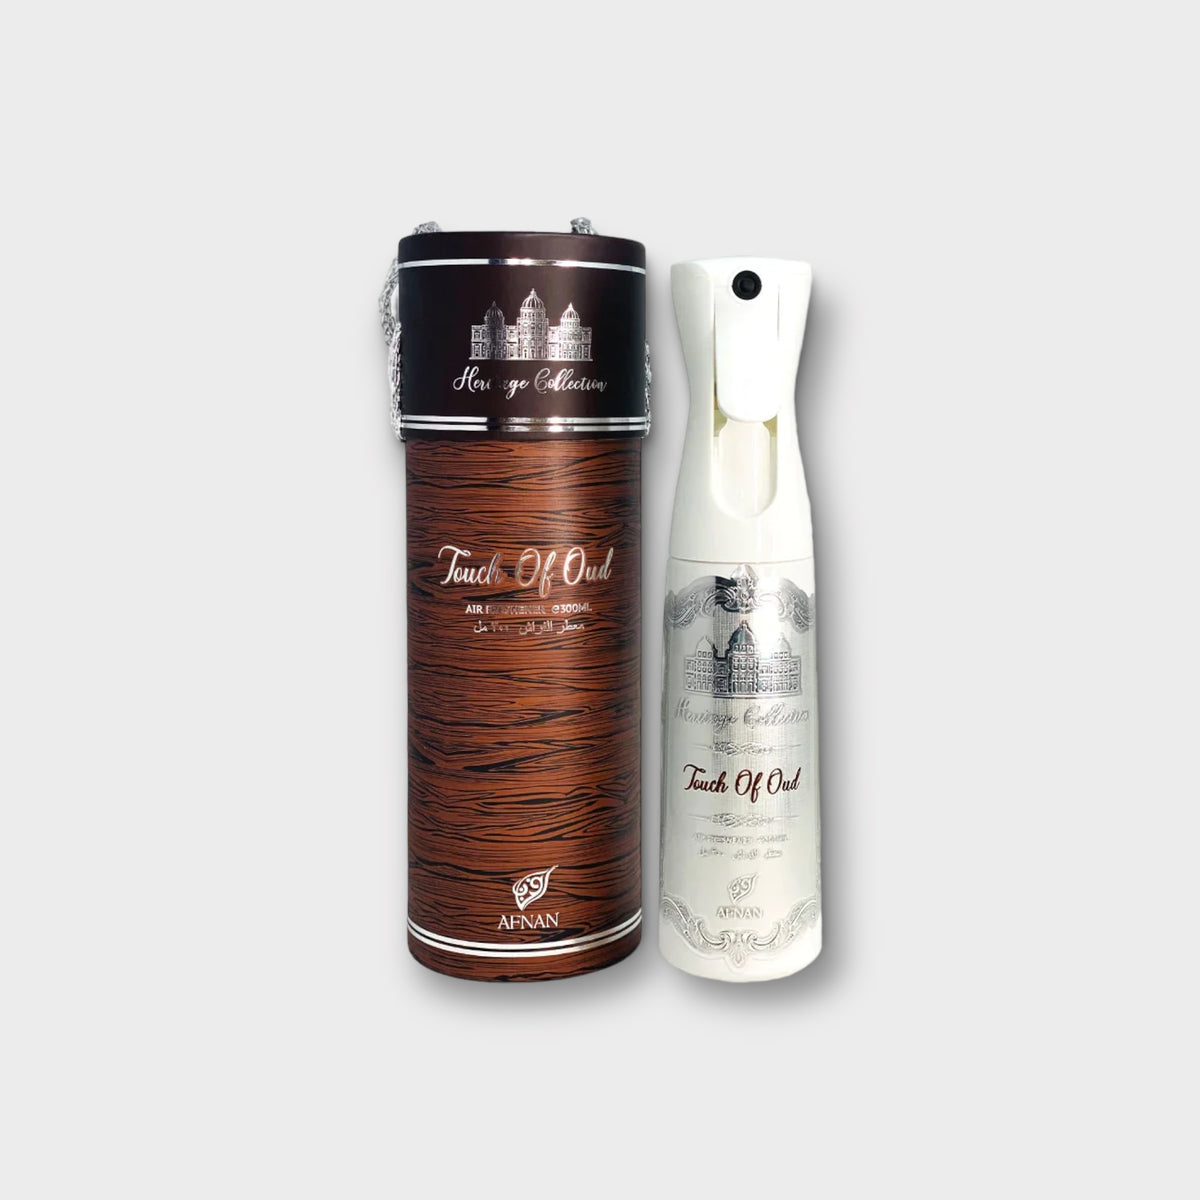 Touch Of Oud Air Freshener